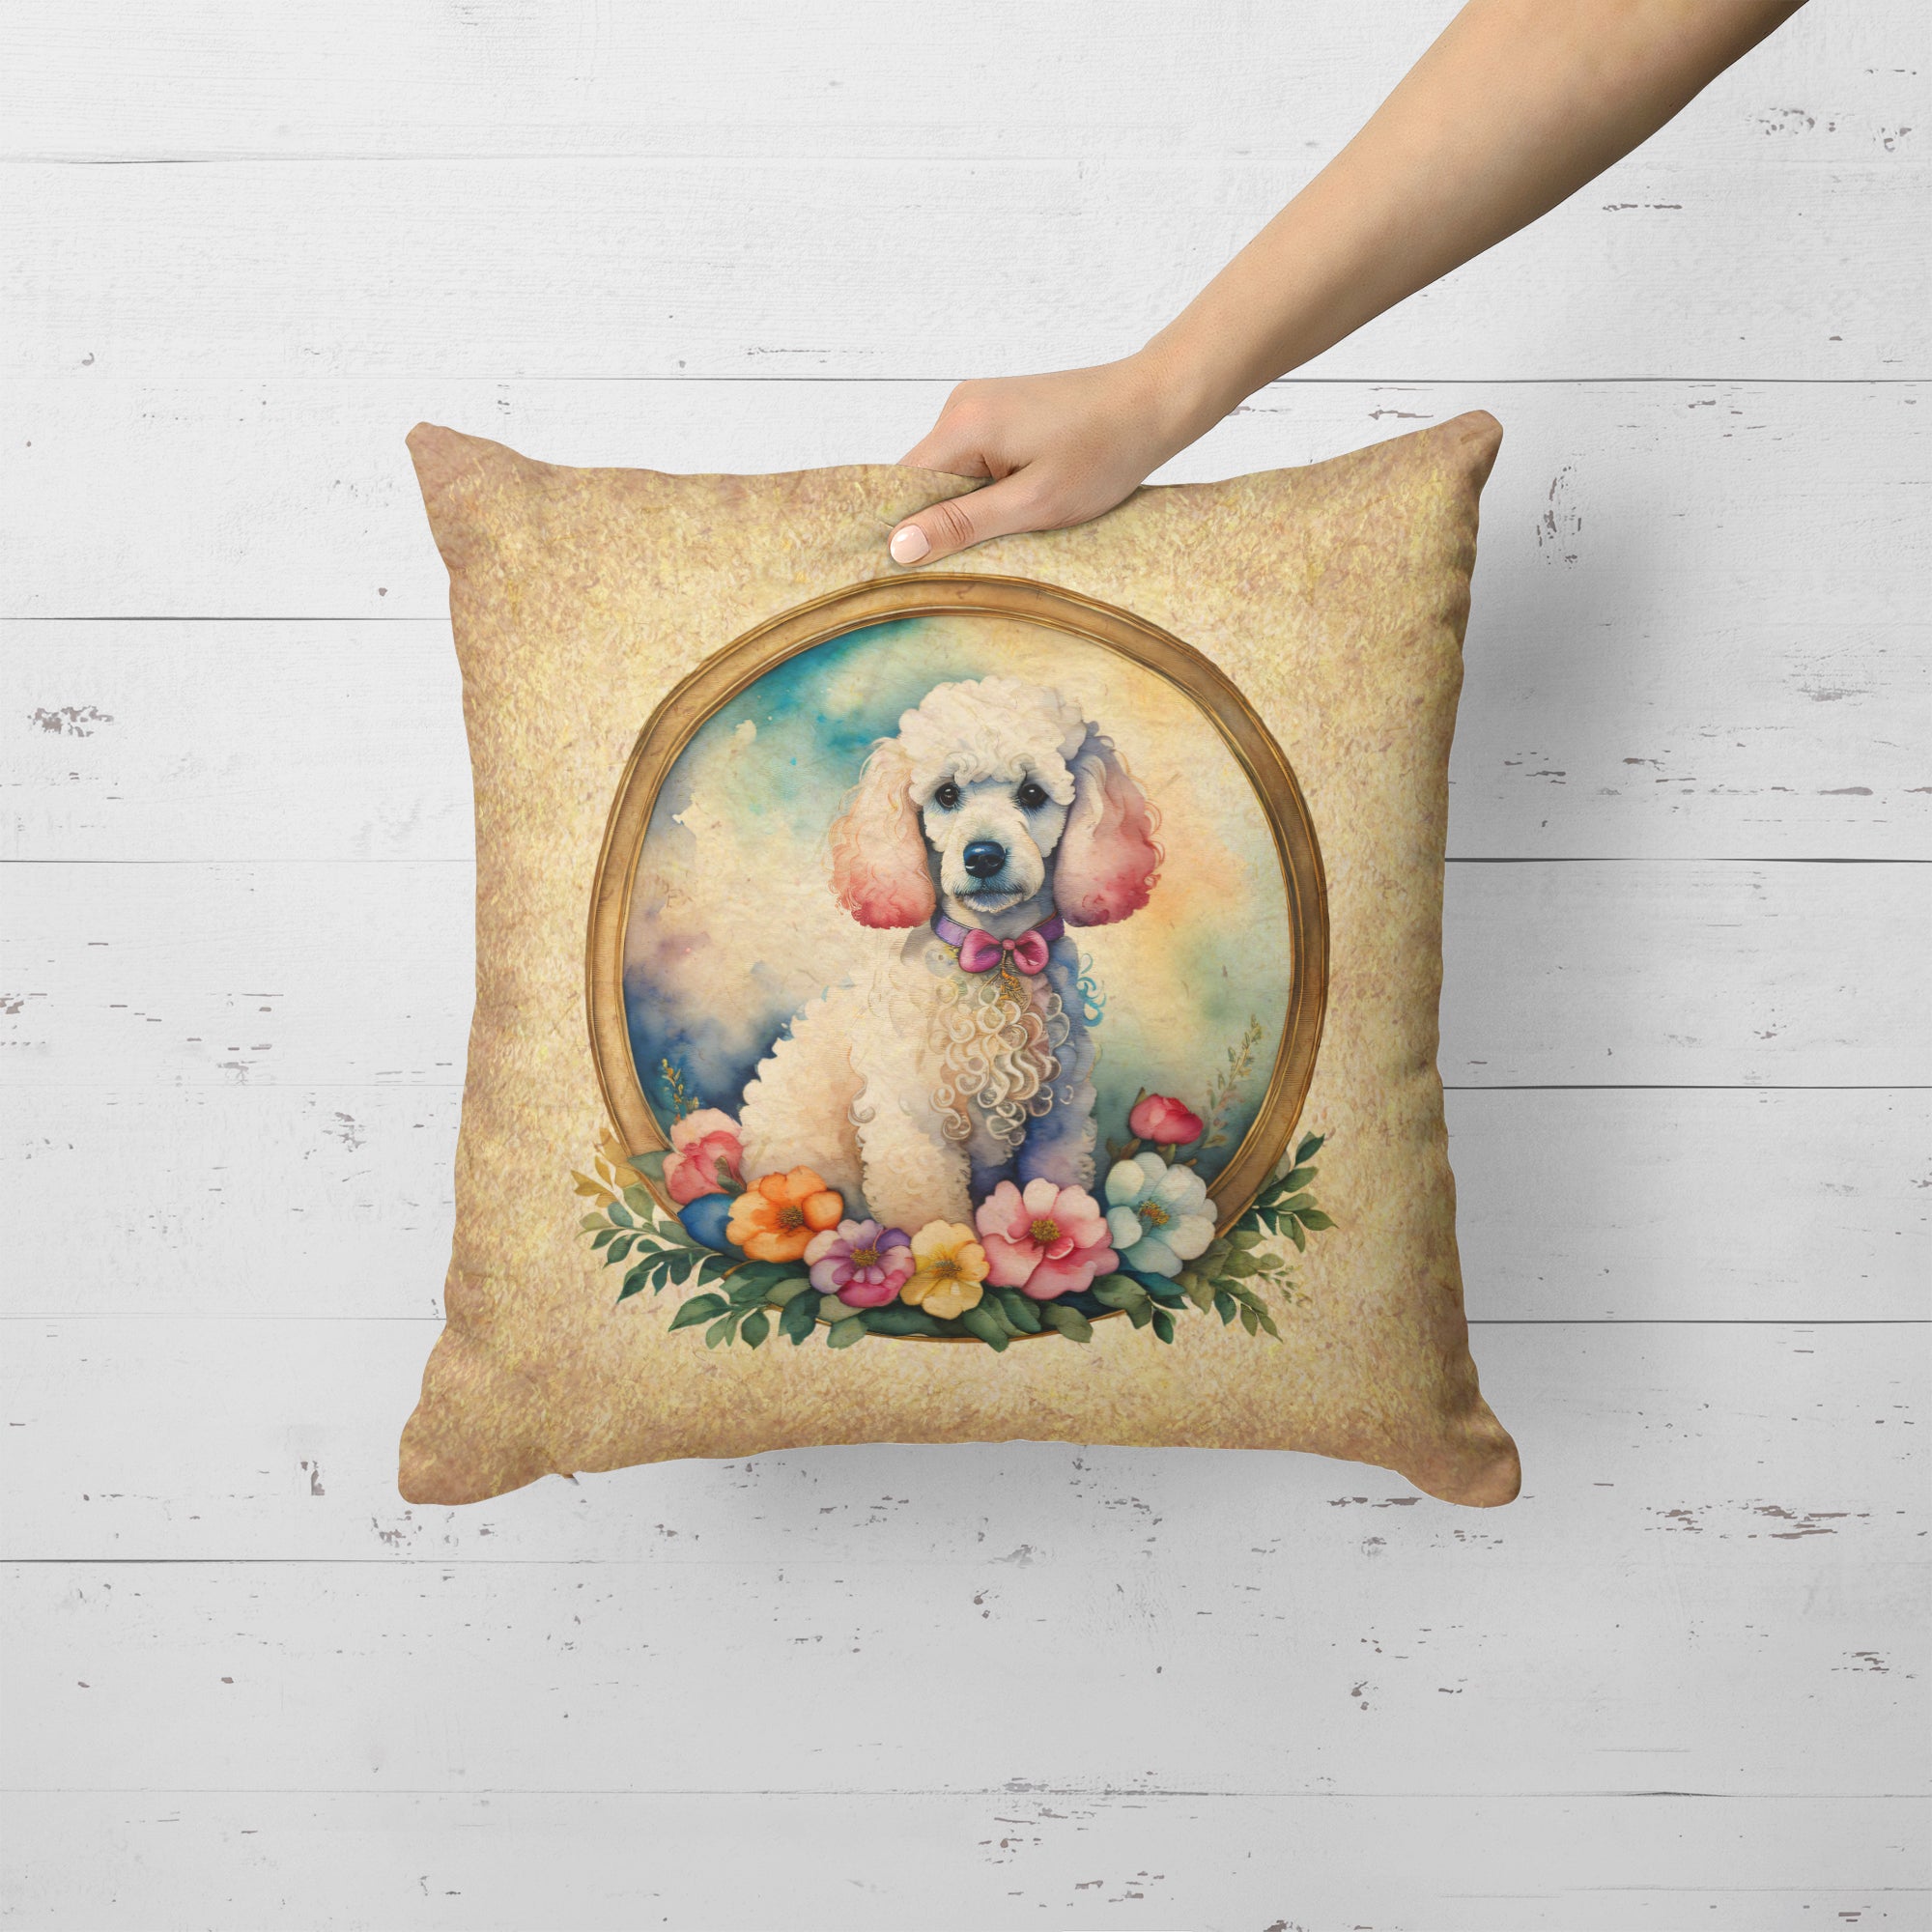 Buy this White Poodle and Flowers Fabric Decorative Pillow